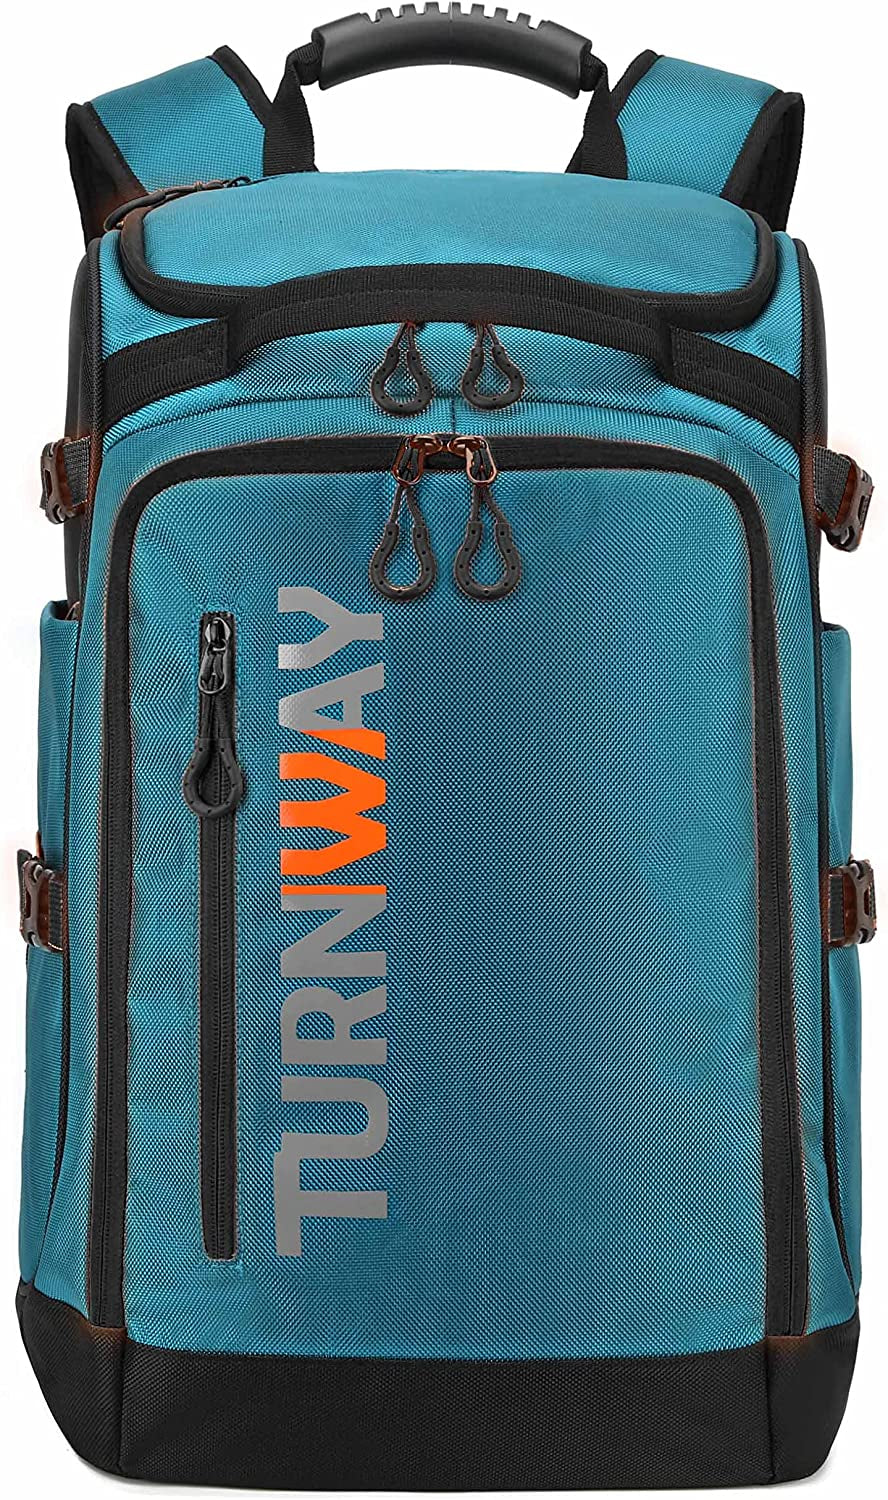 Turnway Ski/Snowboard Boot Bag/Skating Bag | Excellent for Store and Transport Gear, Jacket, Helmet, Goggles, Gloves & Accessories